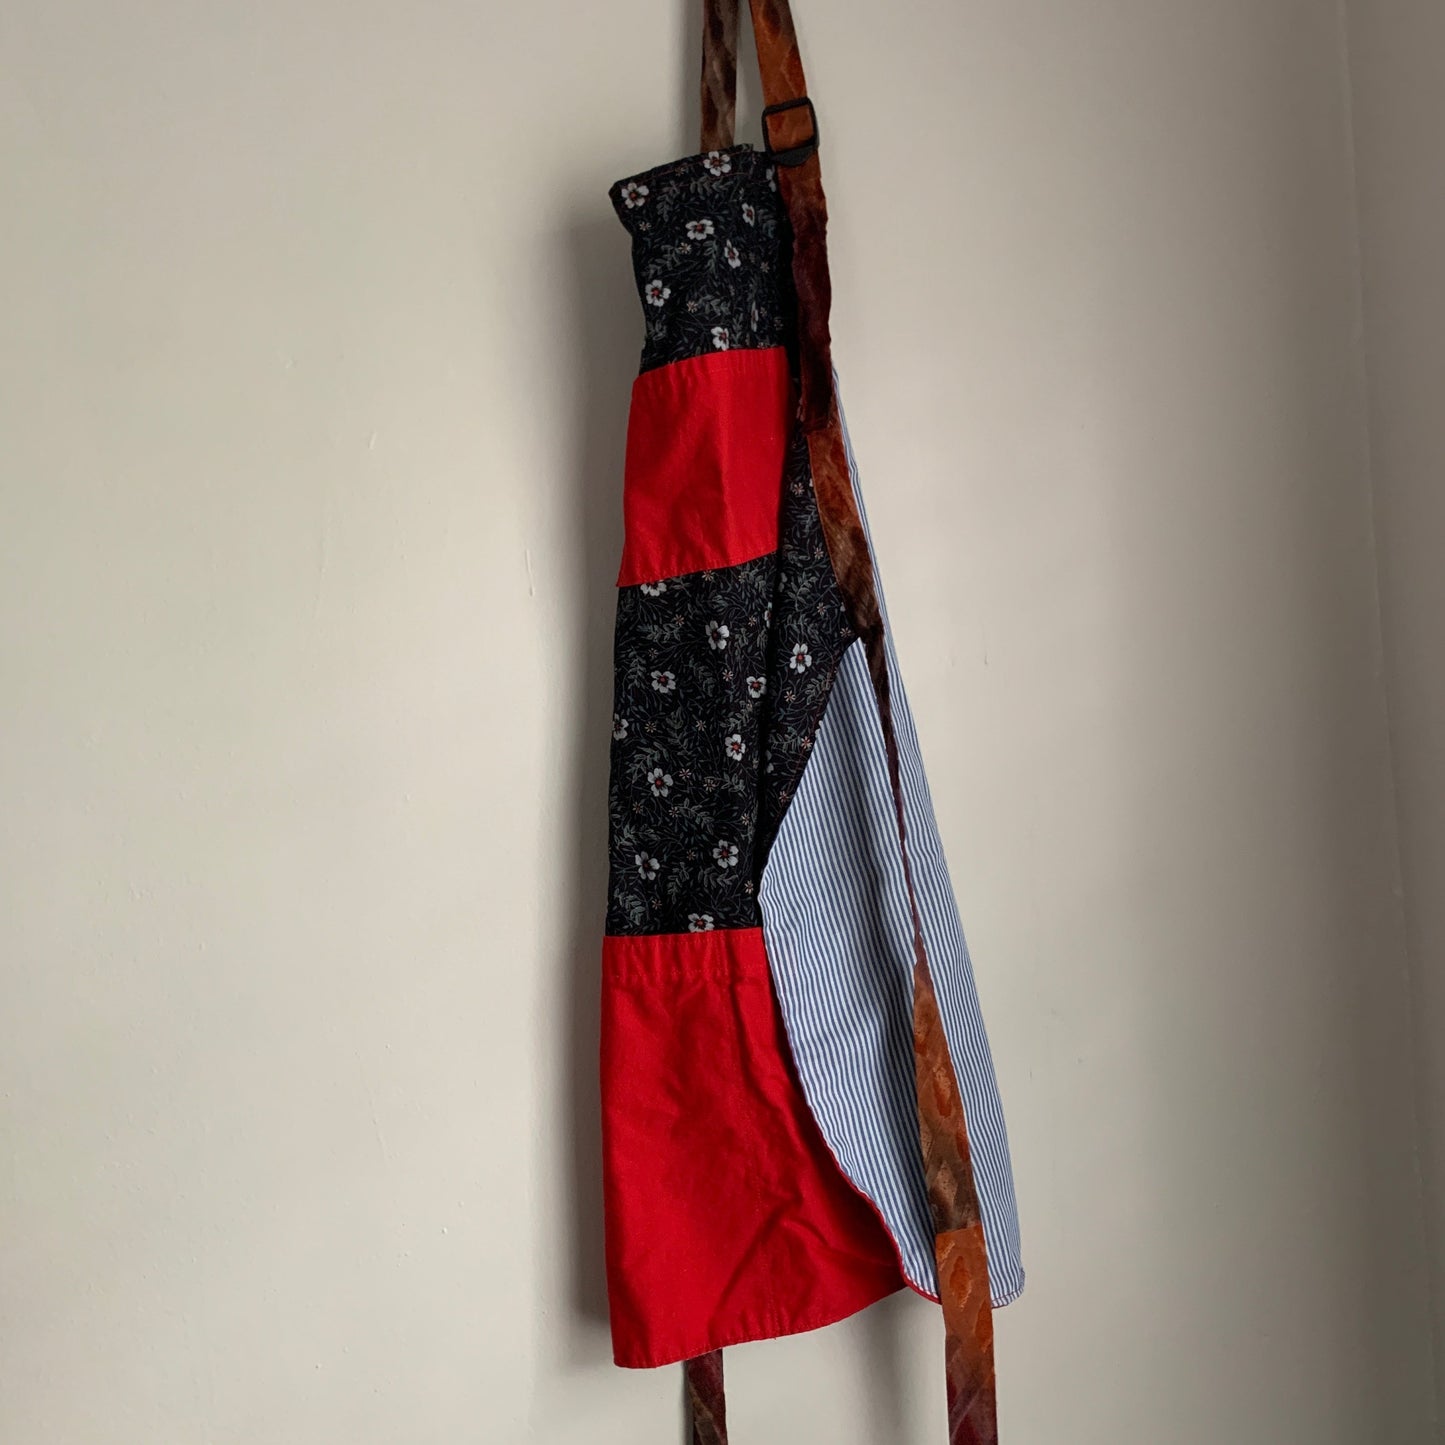 Apron - Navy & Red